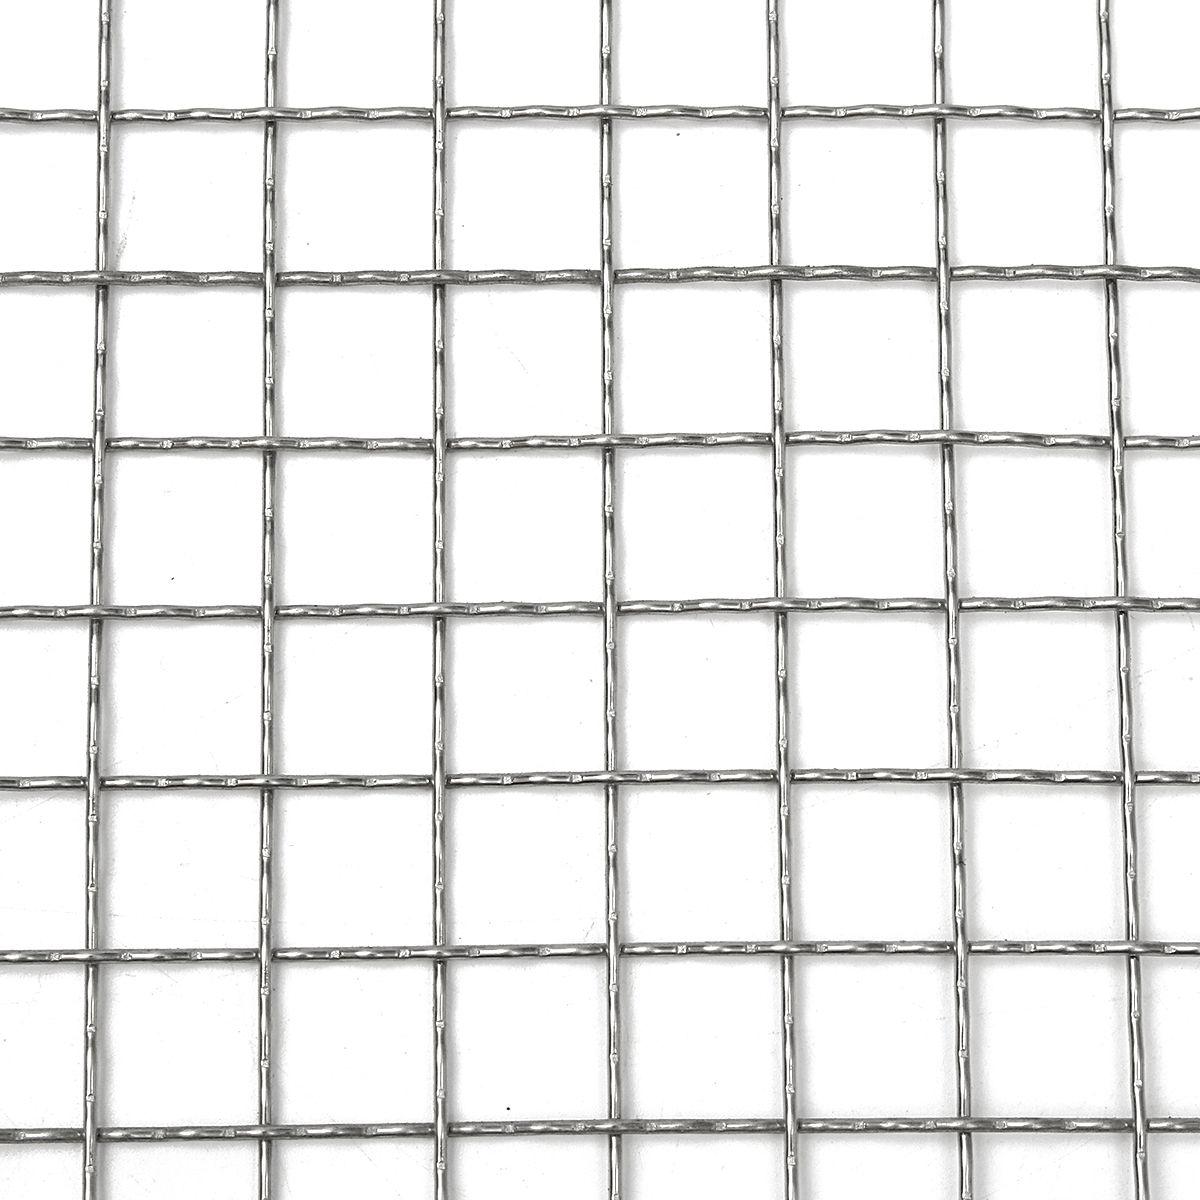 30cmx30cm-2-Mesh-Stainless-Steel-Wire-Cloth-Screen-Filtration-Filter-Sheet-1429028